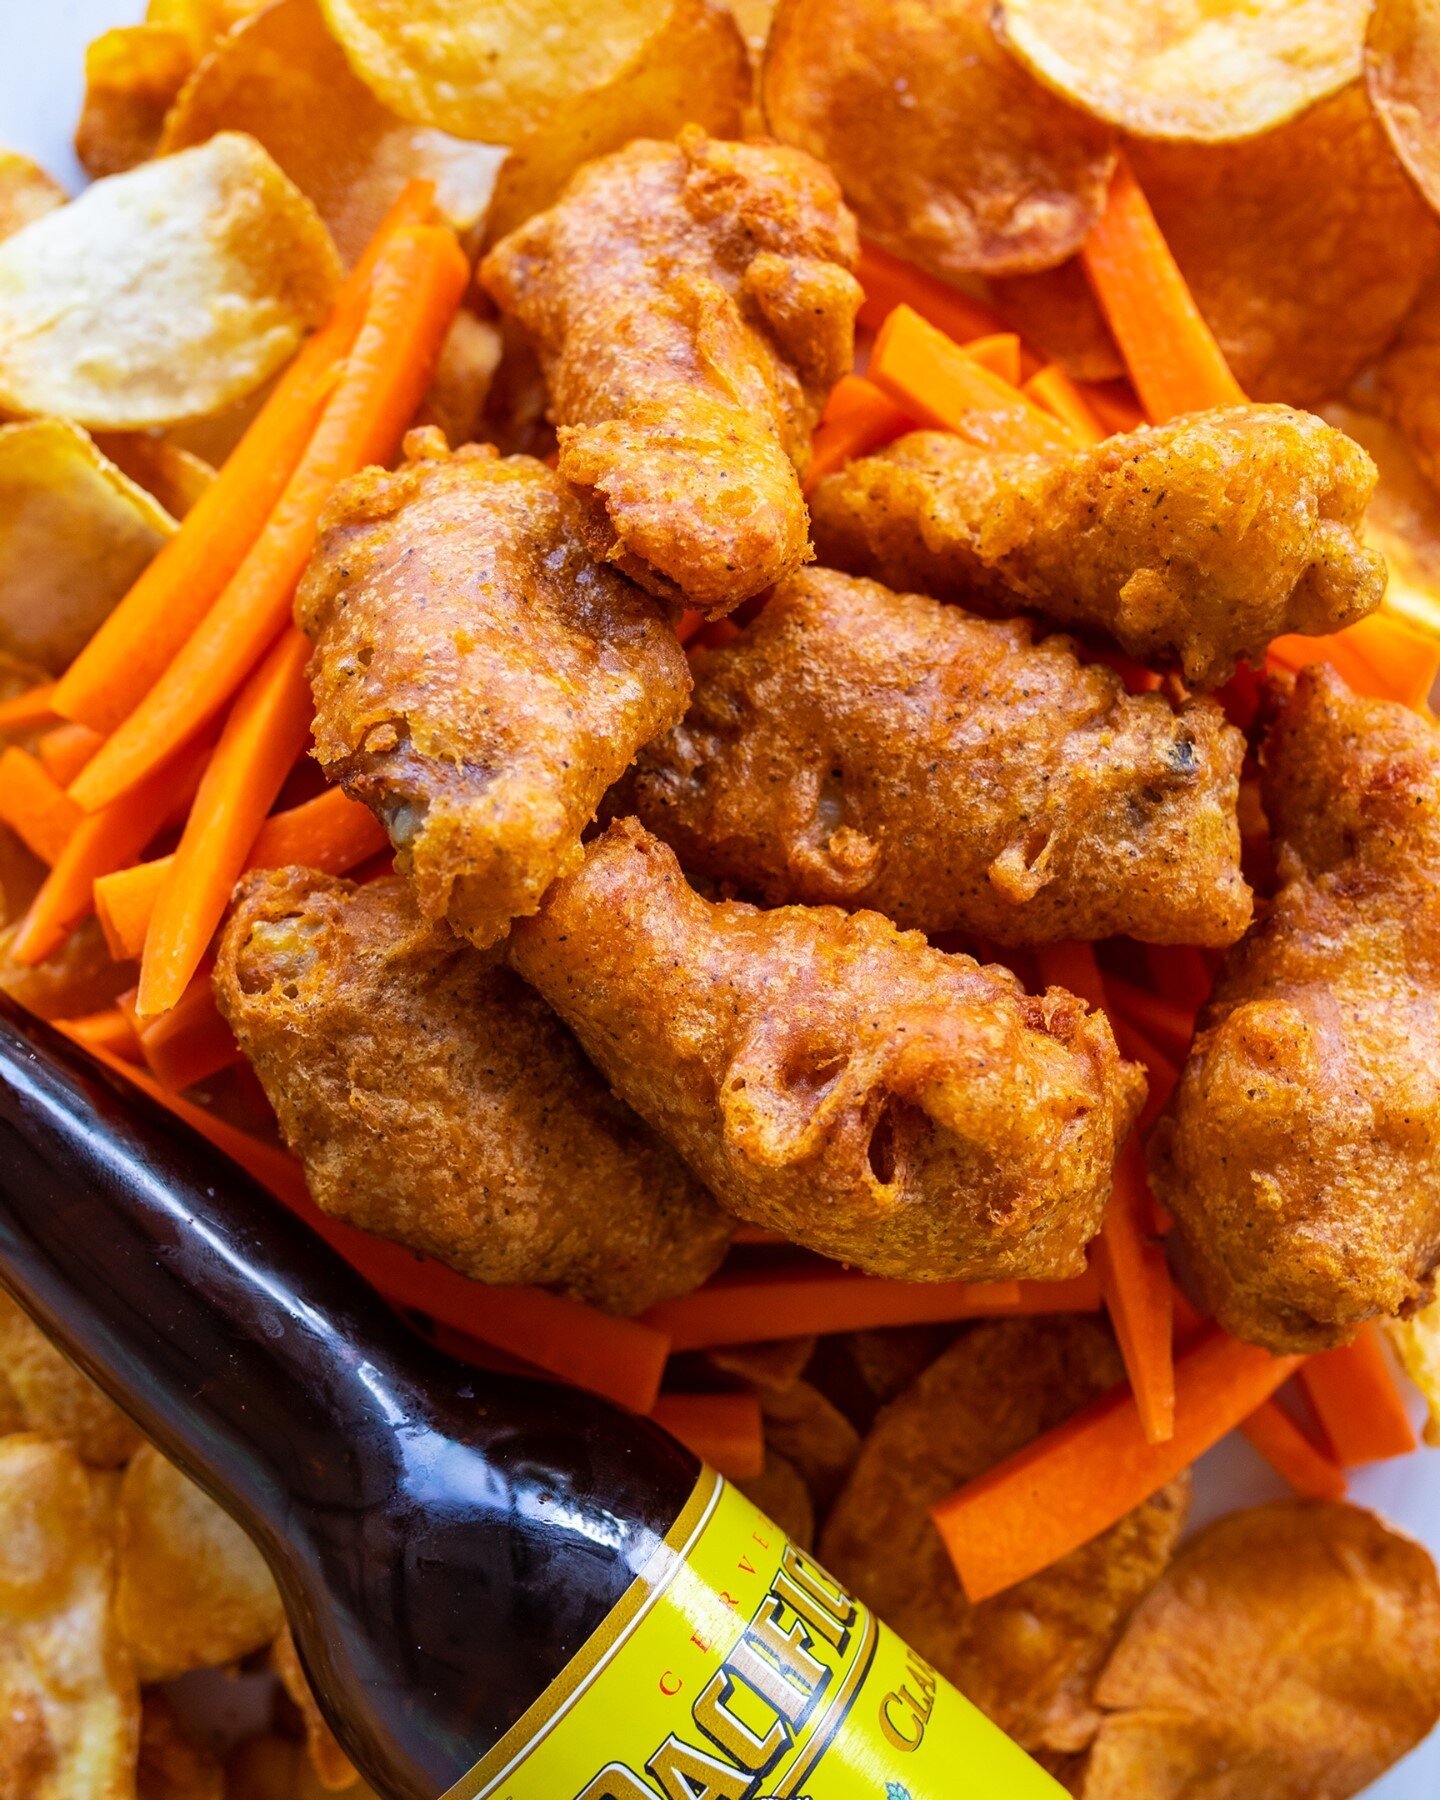 🏀 Watch the NBA Conference Finals with Haven wings tonight!!⁠
⁠
🐔 Wings &amp; Comfort, Fried in Napa.⁠
⁠
⏰ Haven is an online-only fried chicken joint in Napa.  Order anytime for delivery or pick up every Thurs&ndash;Sun from 5-8pm.⁠
⁠
📱 Place you